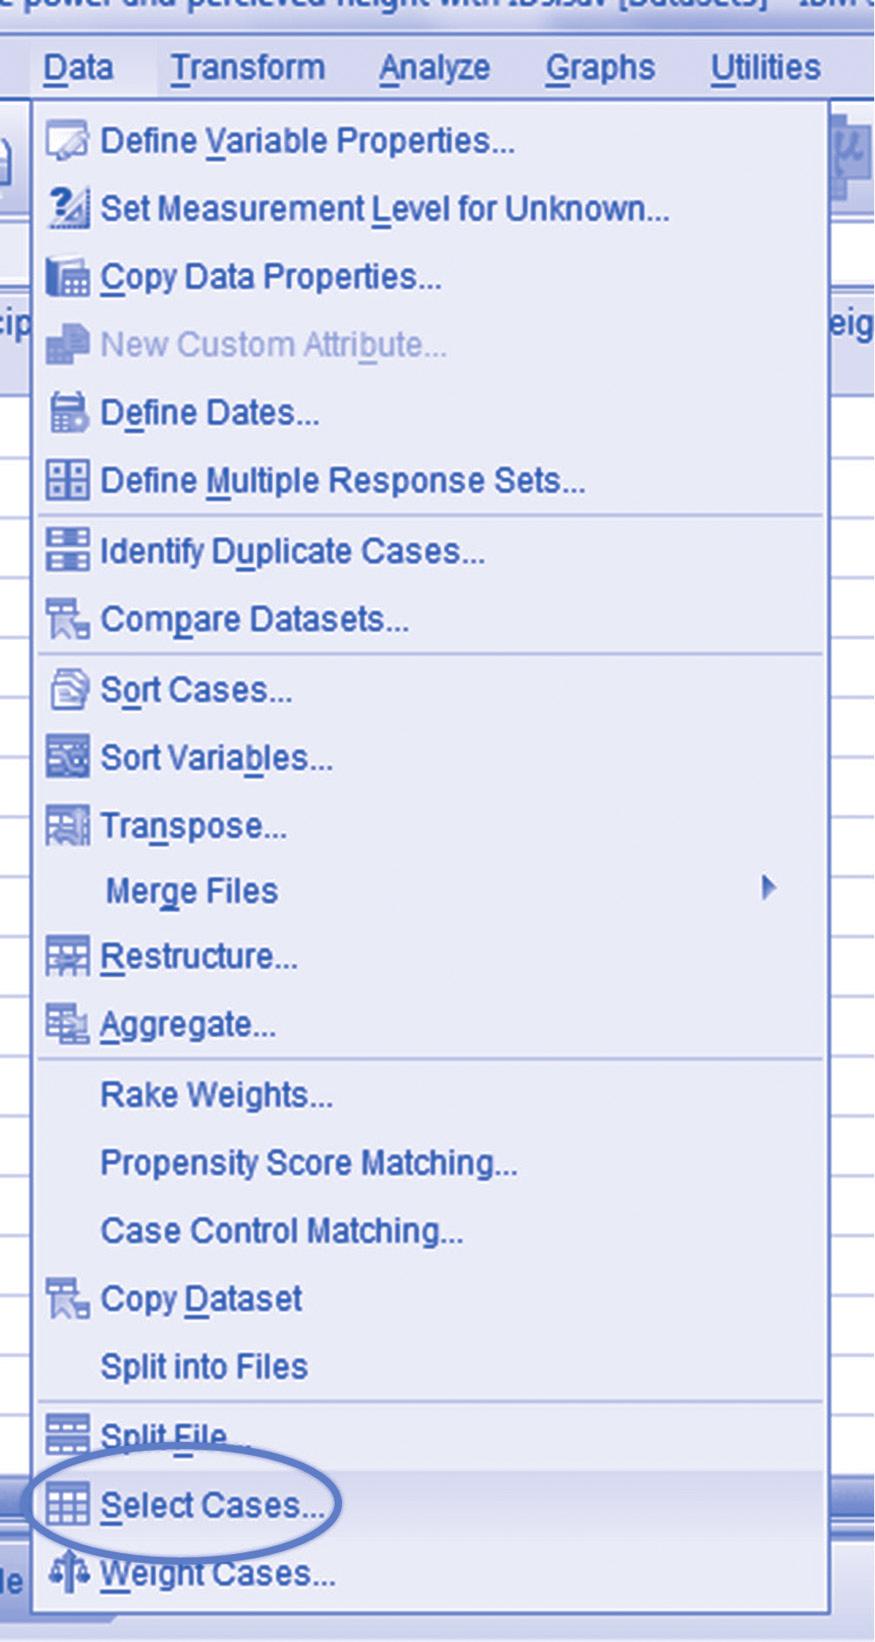 4 YOUR BASIC SPSS TOOLBOX Choosing Select Cases opens the following dialogue box.